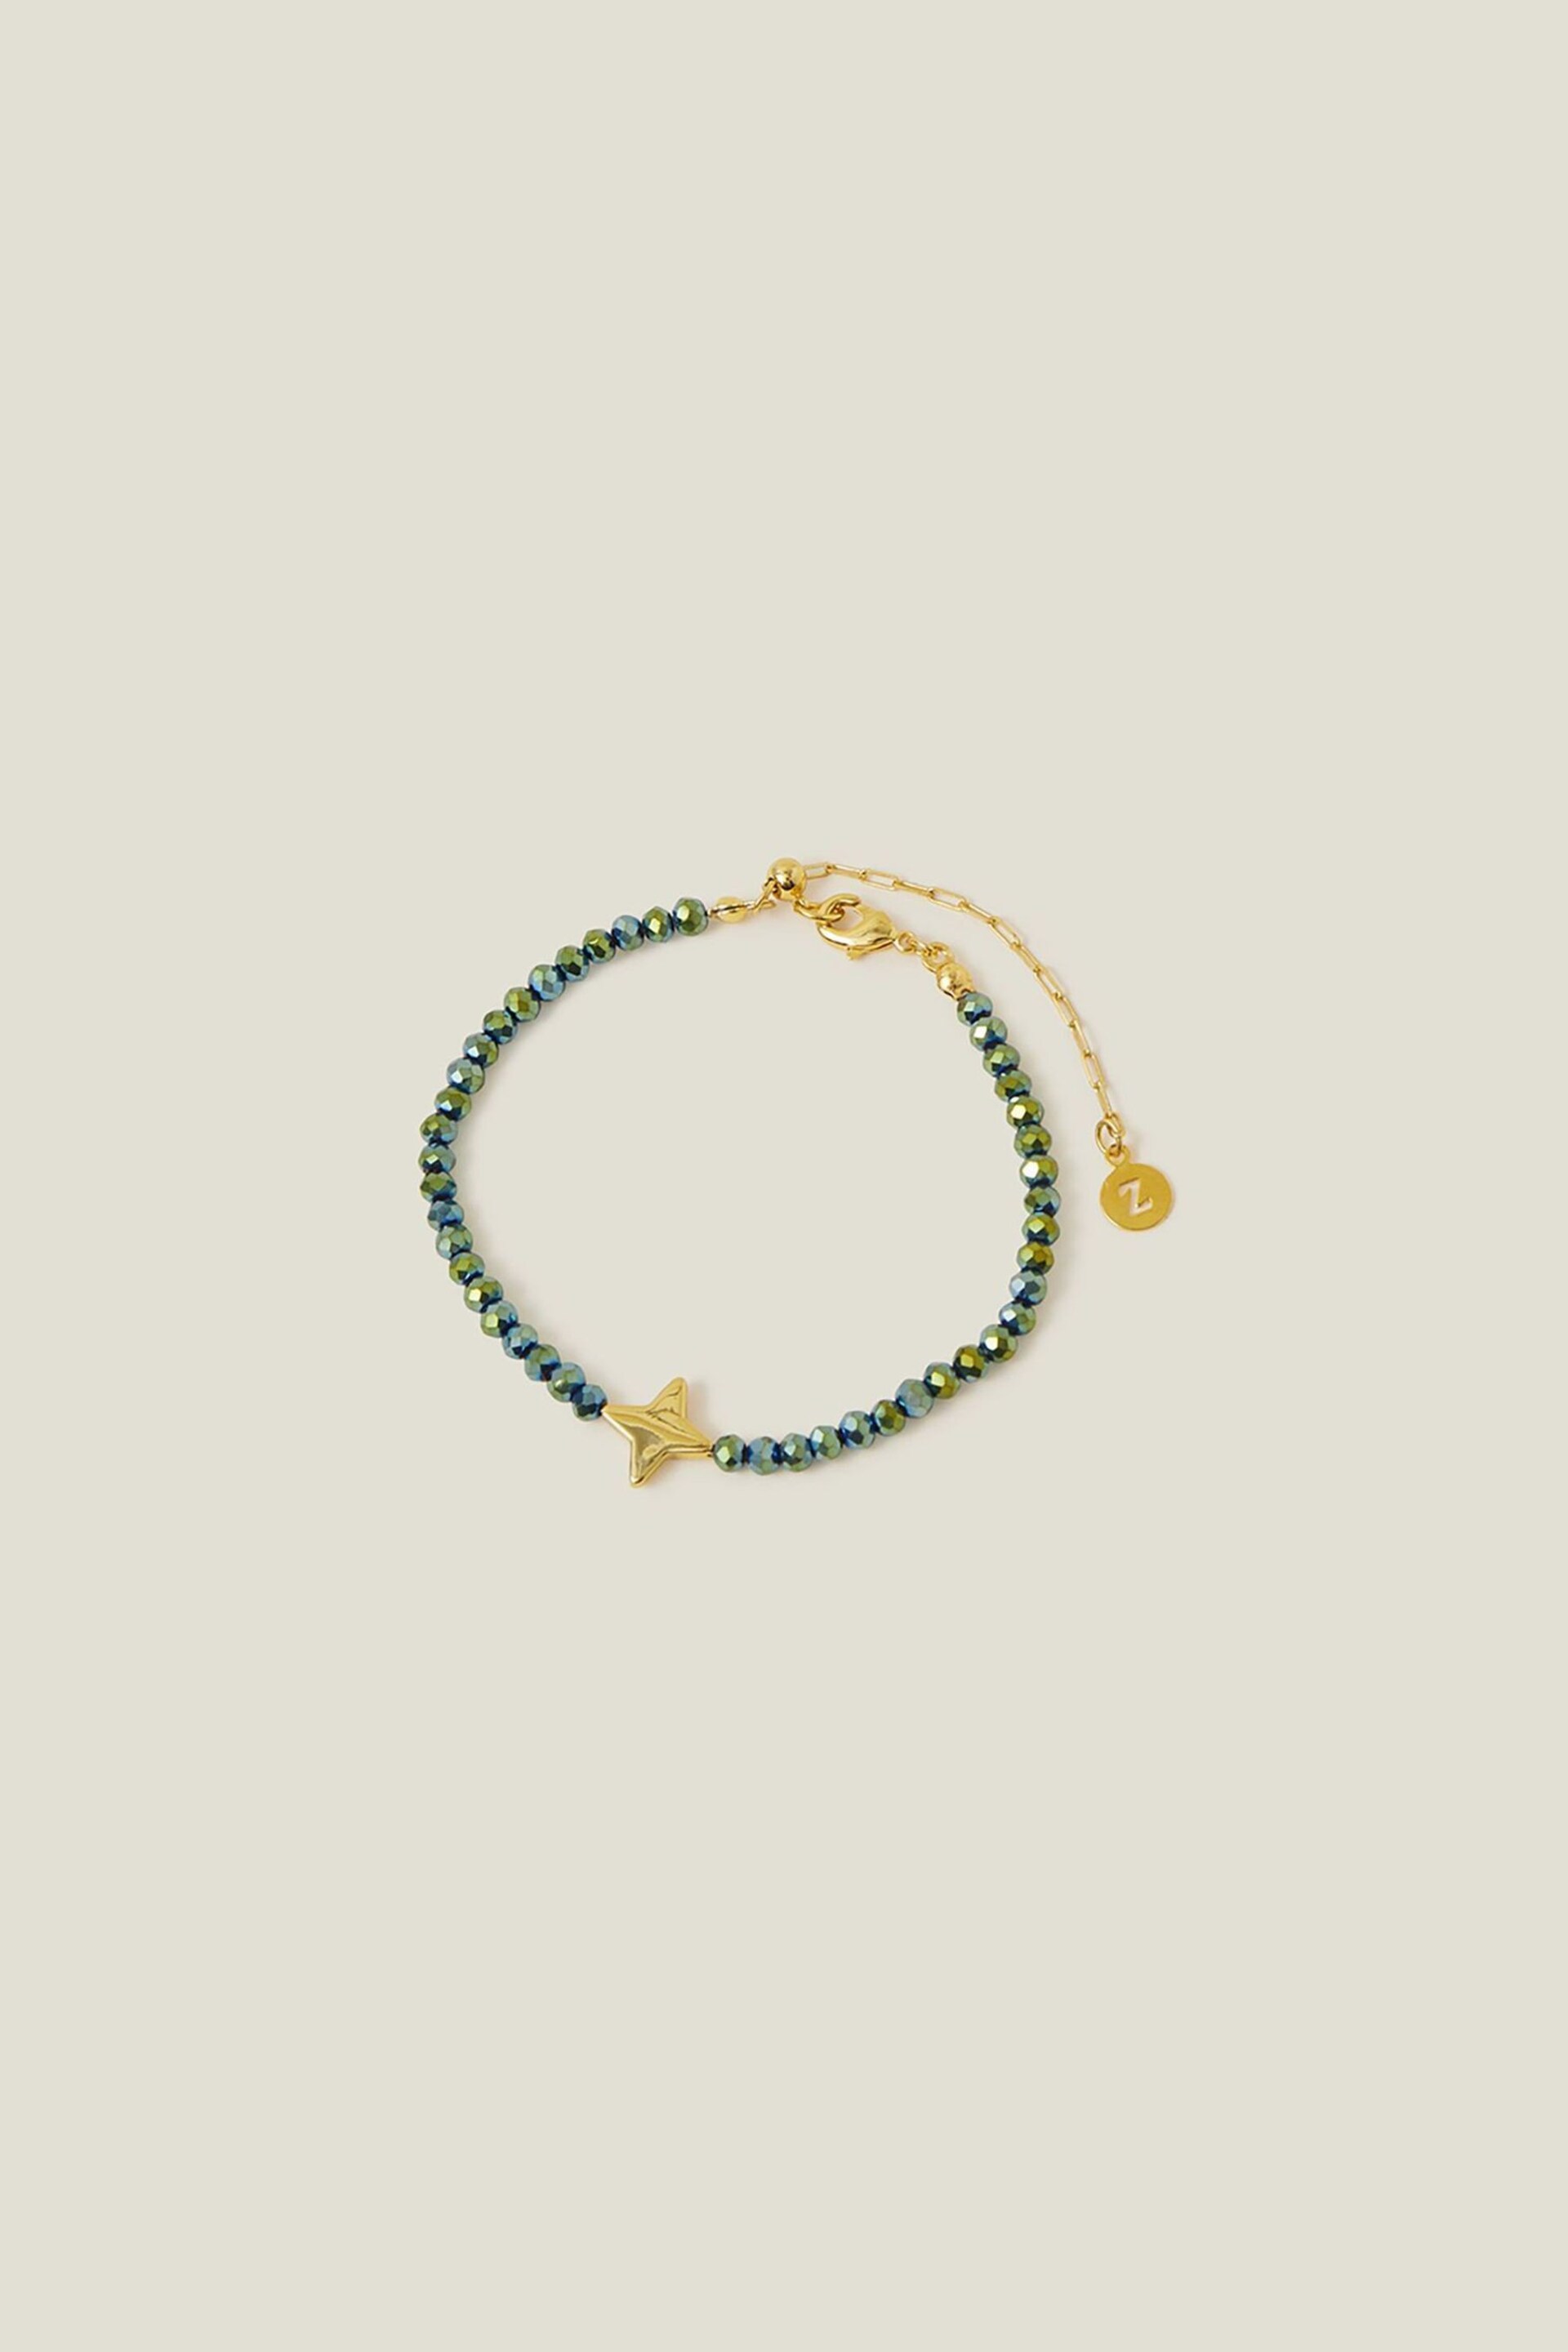 Accessorize 14ct Gold Plated Beaded Star Bracelet - Image 1 of 3